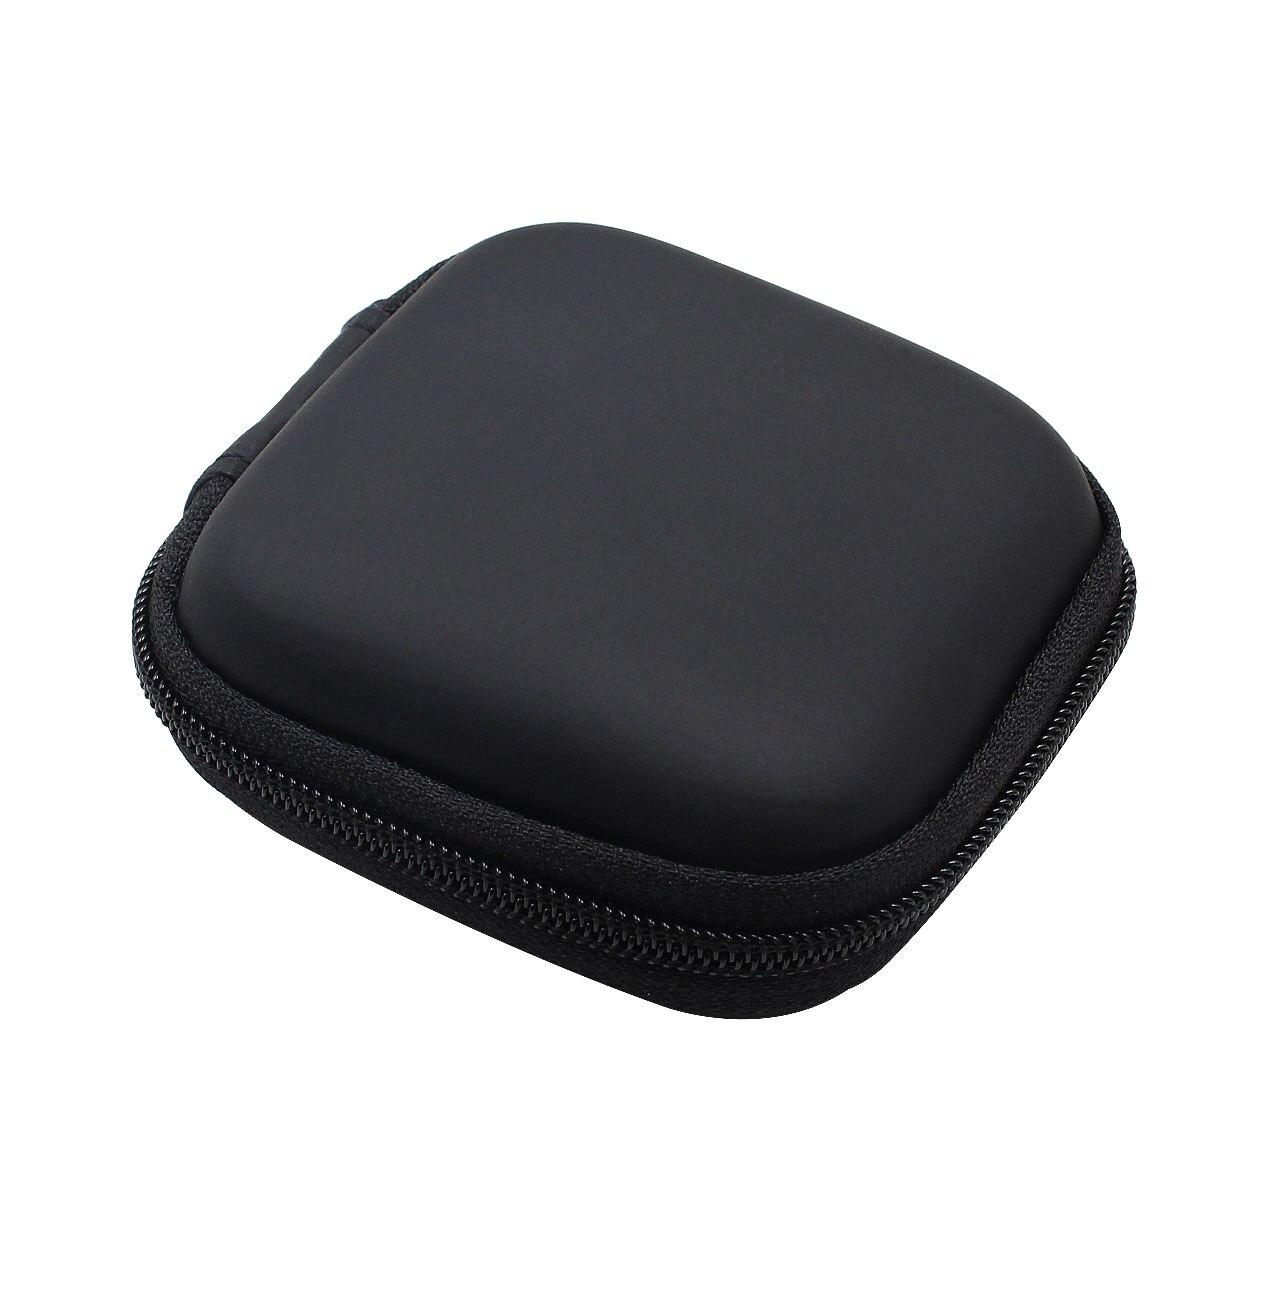 Carrying Hard Case Box Storage Bag Voor Sony MDR-XB50BS Draadloze Headset